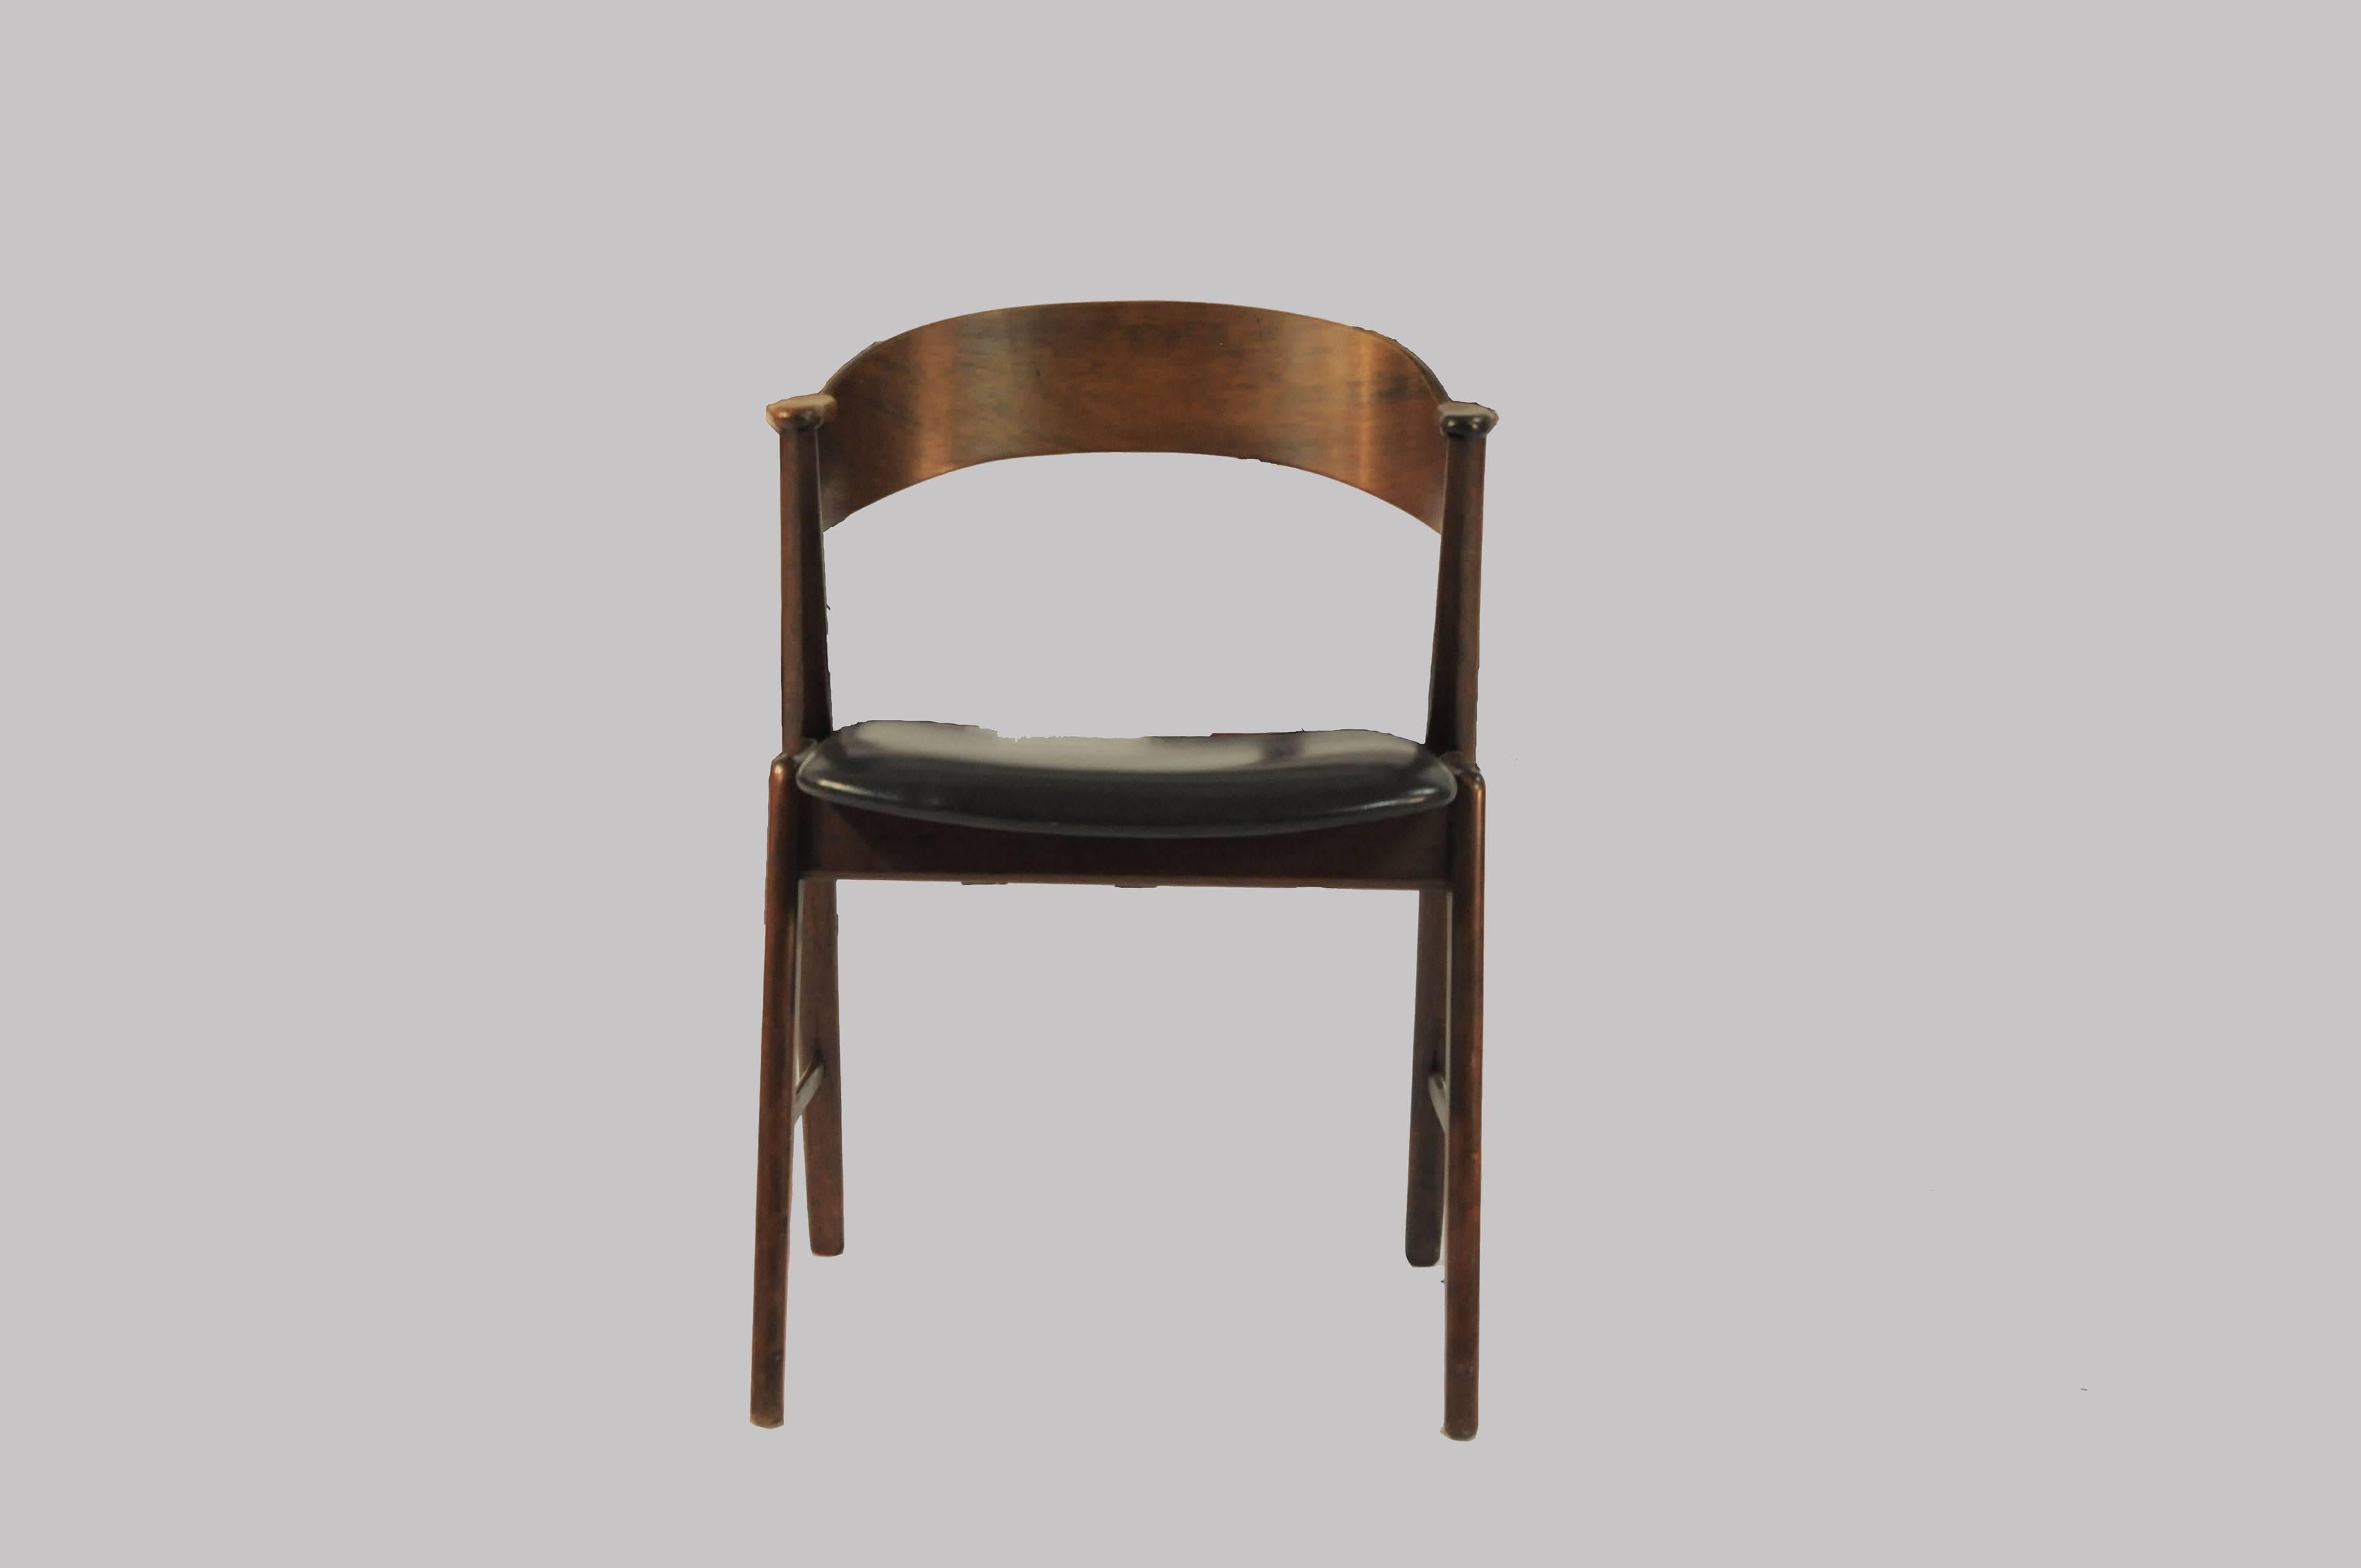 1960's Six Fully Restored Danish Rosewood Dining Chairs Custom Upholstery

Set of six Danish dining chairs known as model 32 manufactored by Korup Stolefabrik in the 1960's. The chairs feature curved rosewood backrests sliding into rosewood armrests